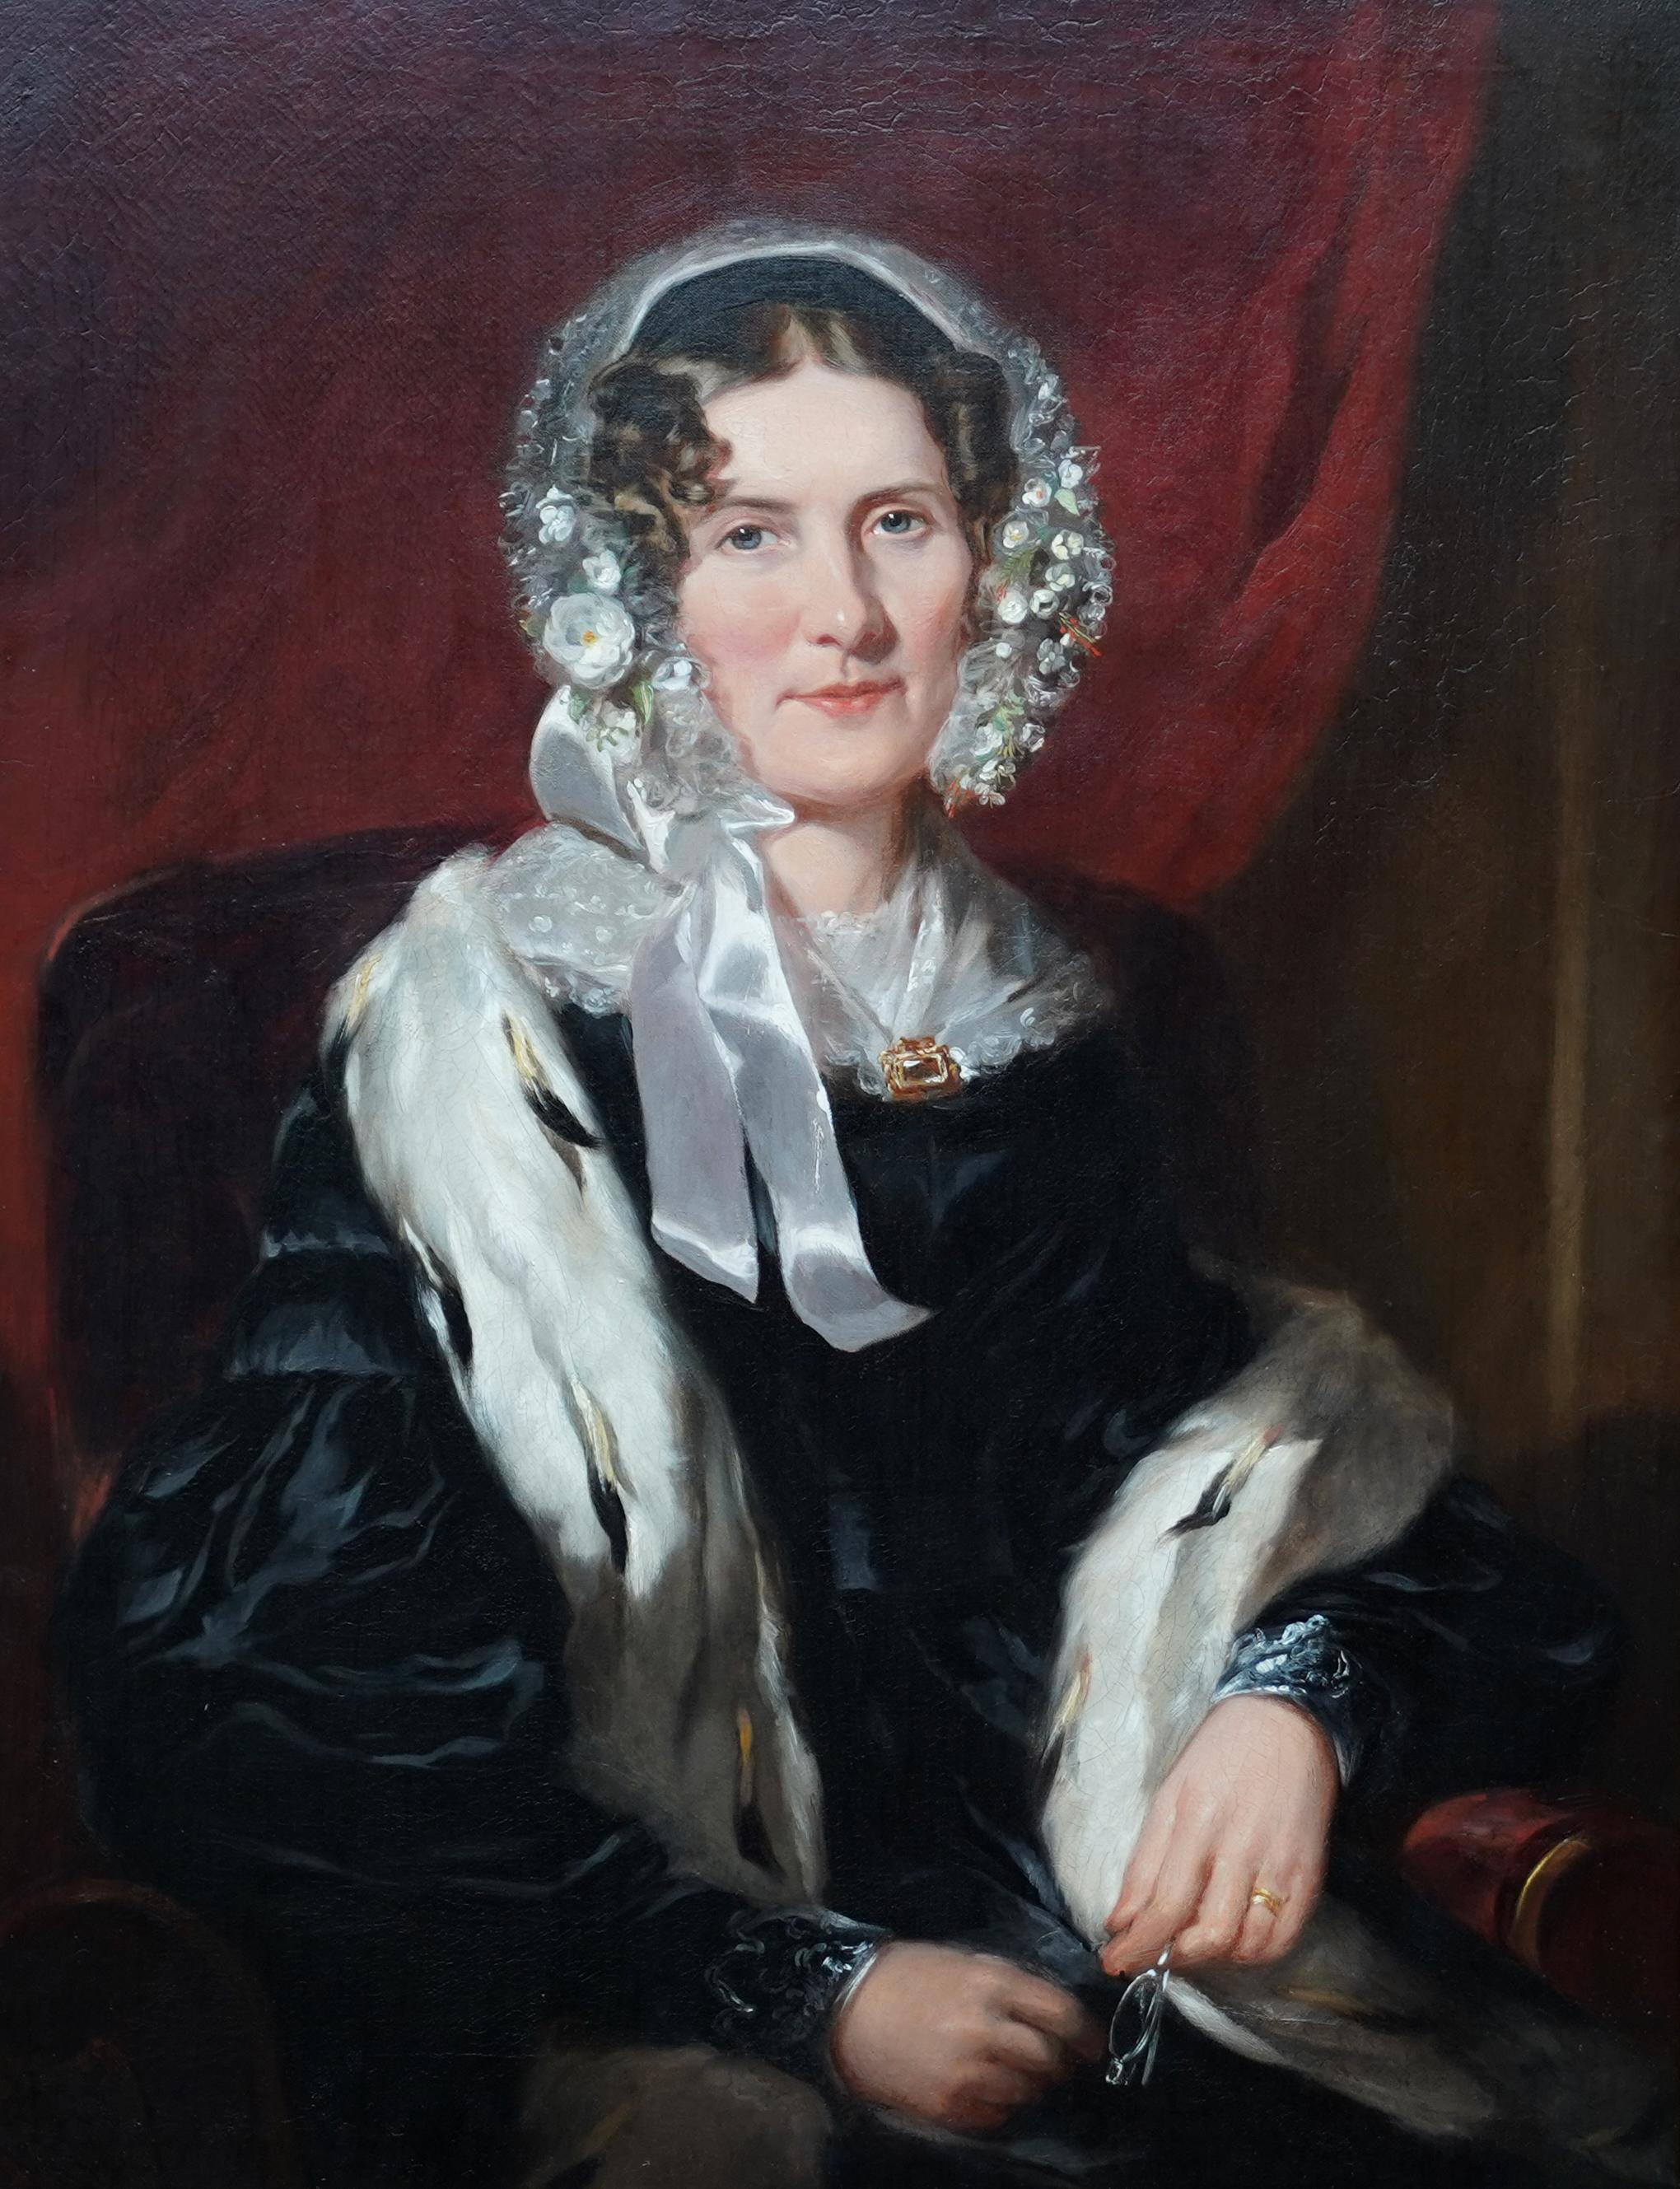 Portrait of Lady in Ermine Stole - British 19th century art female oil painting - Painting by Martin Archer Shee (circle)